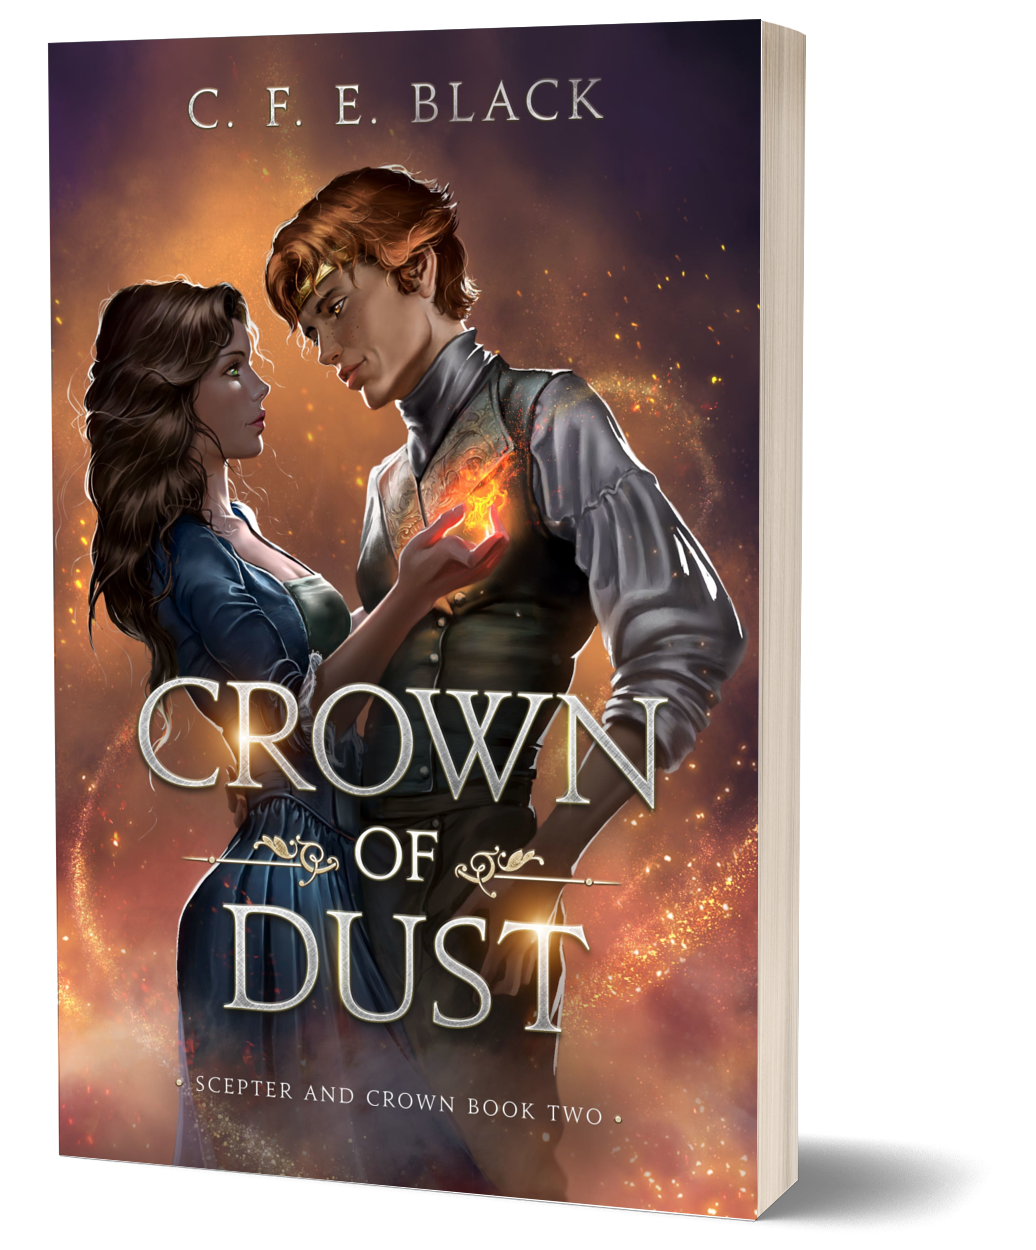 Crown of Dust Scepter and Crown Book 2 paperback cover